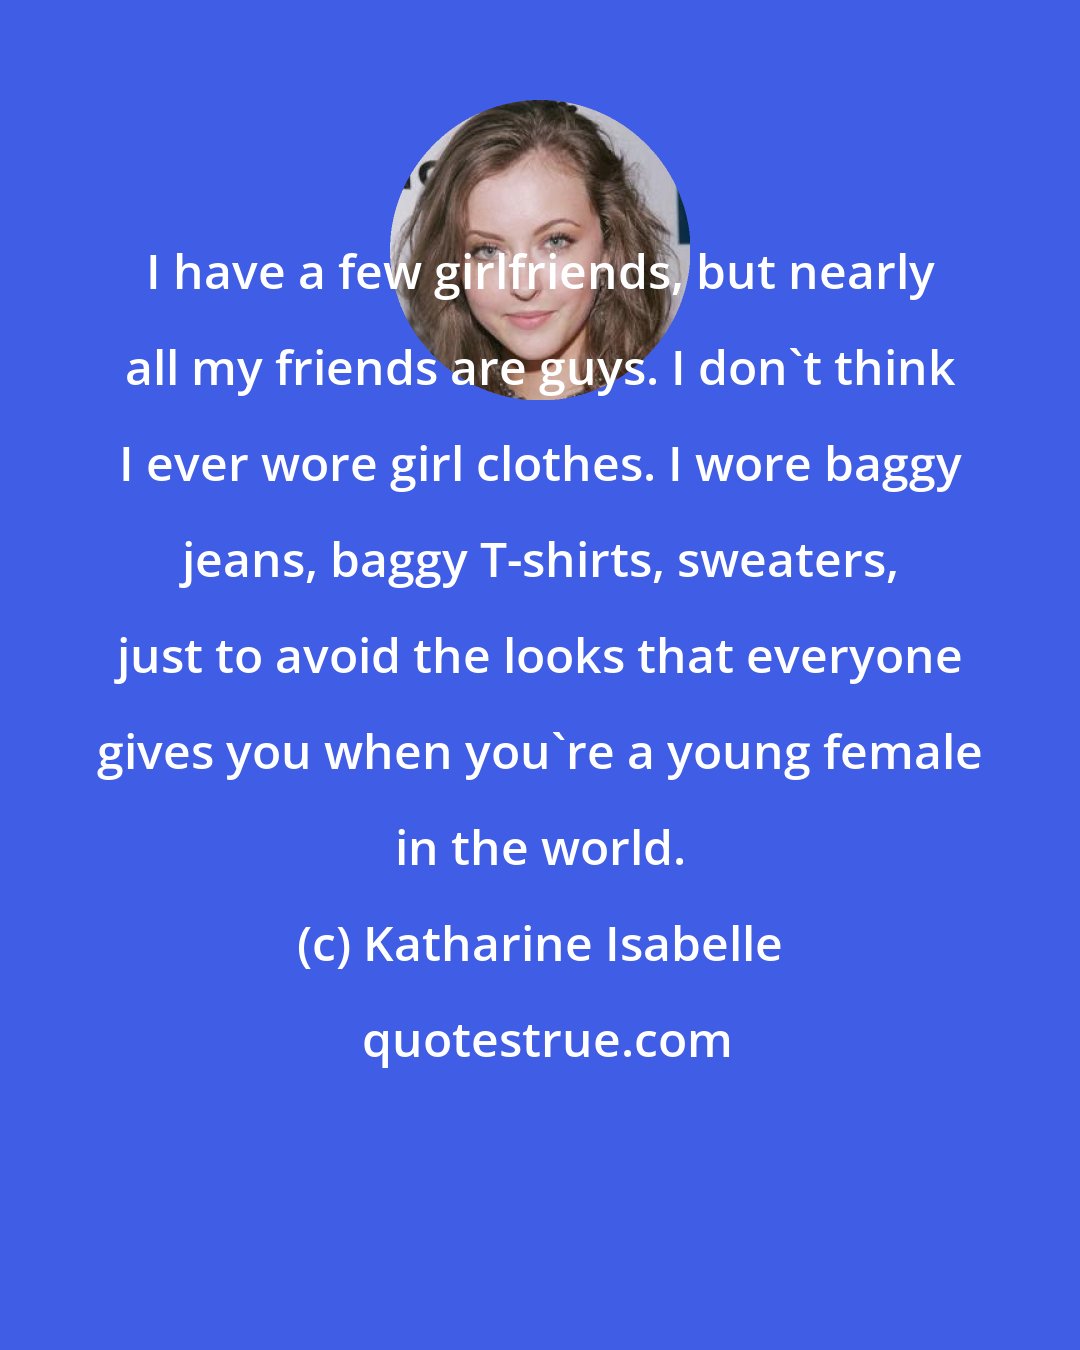 Katharine Isabelle: I have a few girlfriends, but nearly all my friends are guys. I don't think I ever wore girl clothes. I wore baggy jeans, baggy T-shirts, sweaters, just to avoid the looks that everyone gives you when you're a young female in the world.